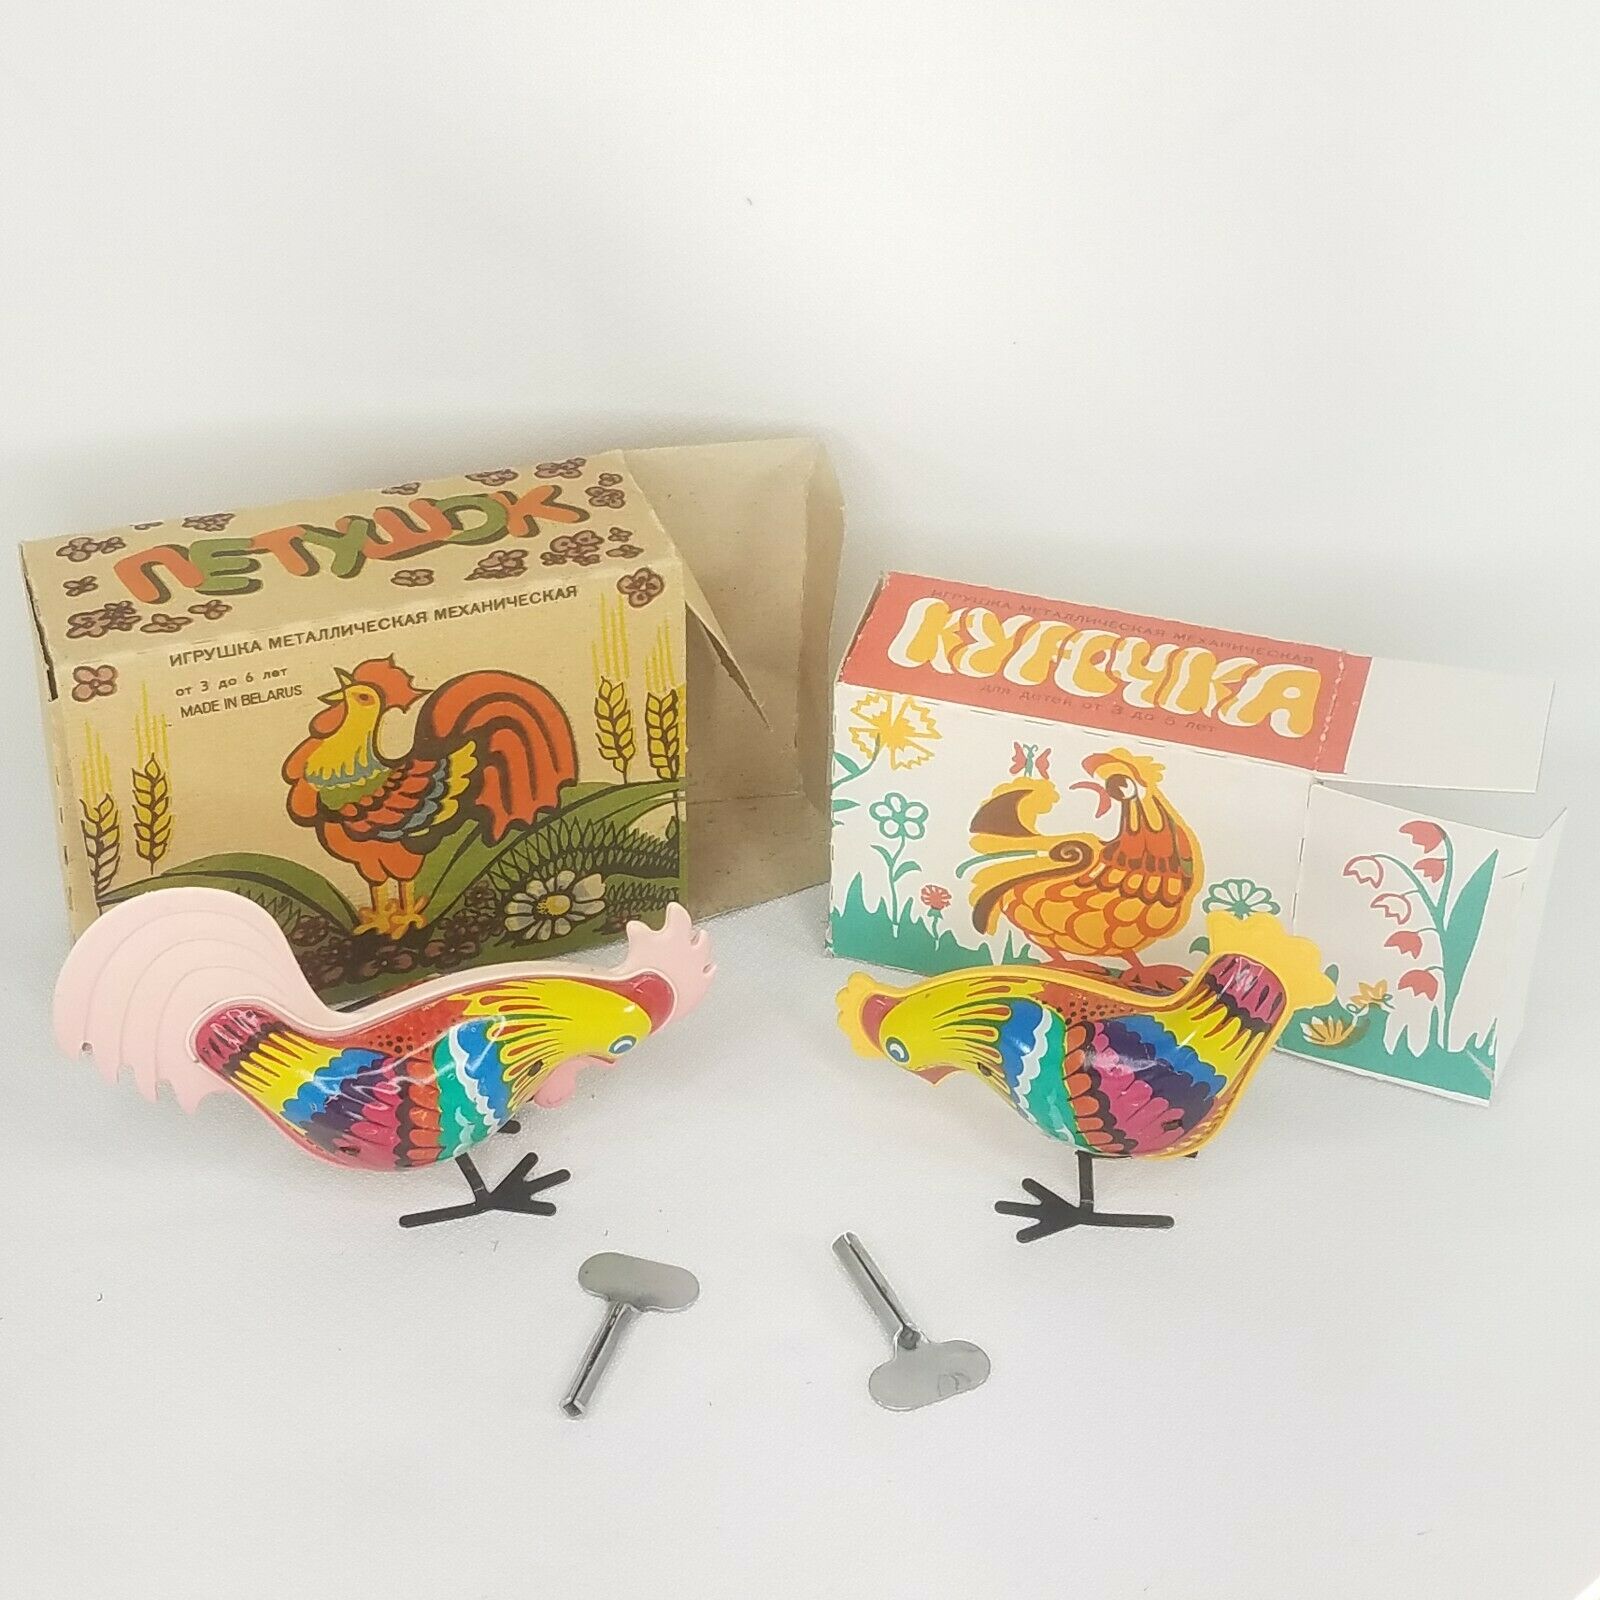 Vintage Tin Pecking Chicken And Rooster Wind-up Toy With Keys Made In Belarus